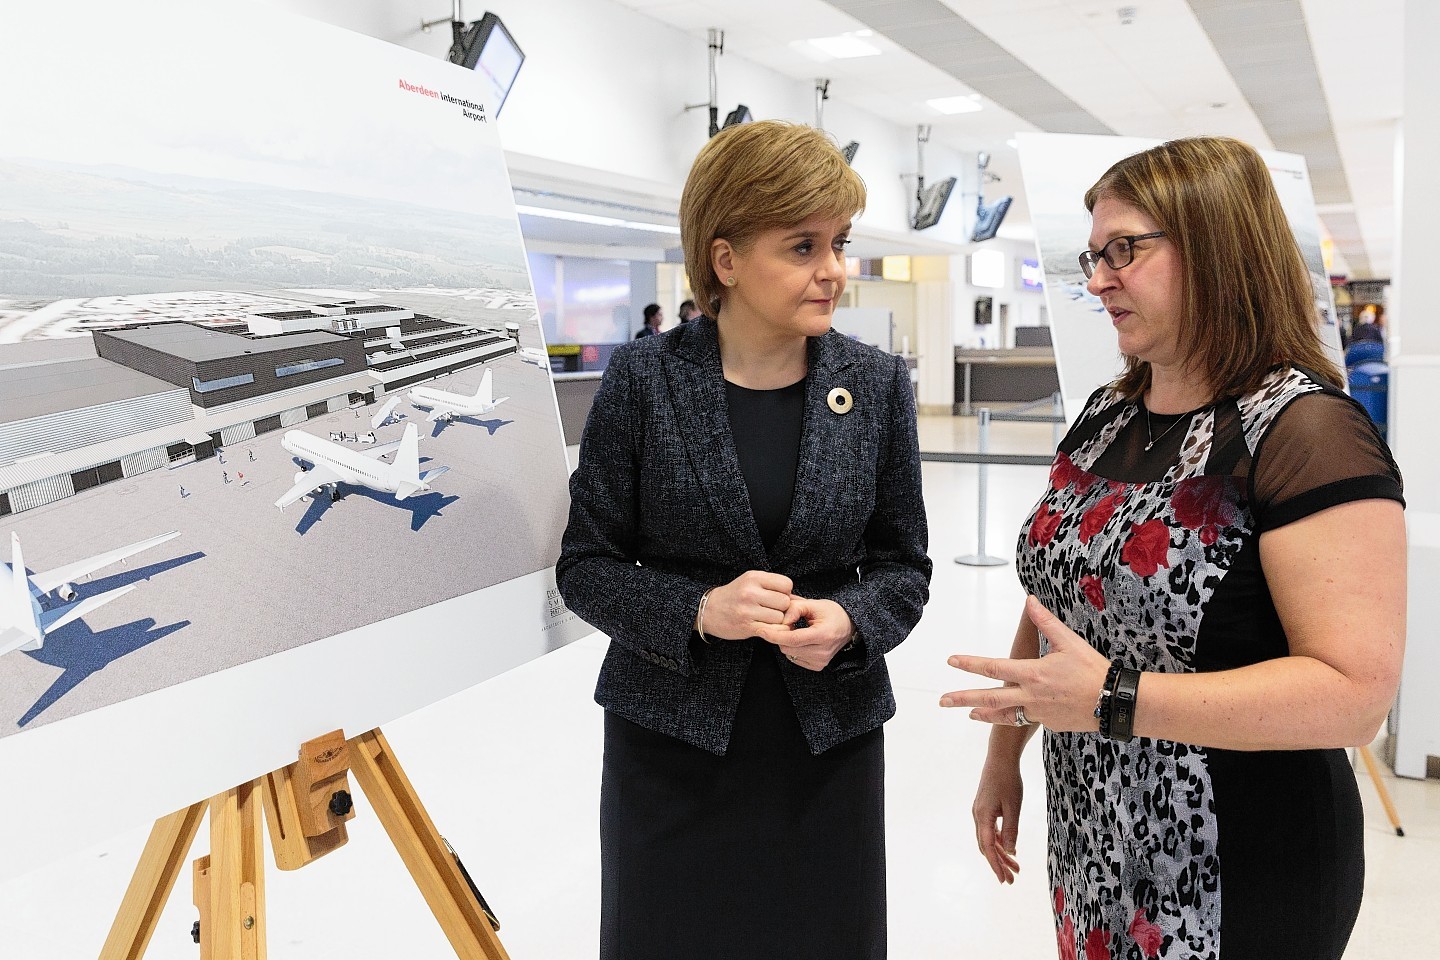 Nicola Sturgeon discusses the proposals with Carol Benzies, managing director of the airport